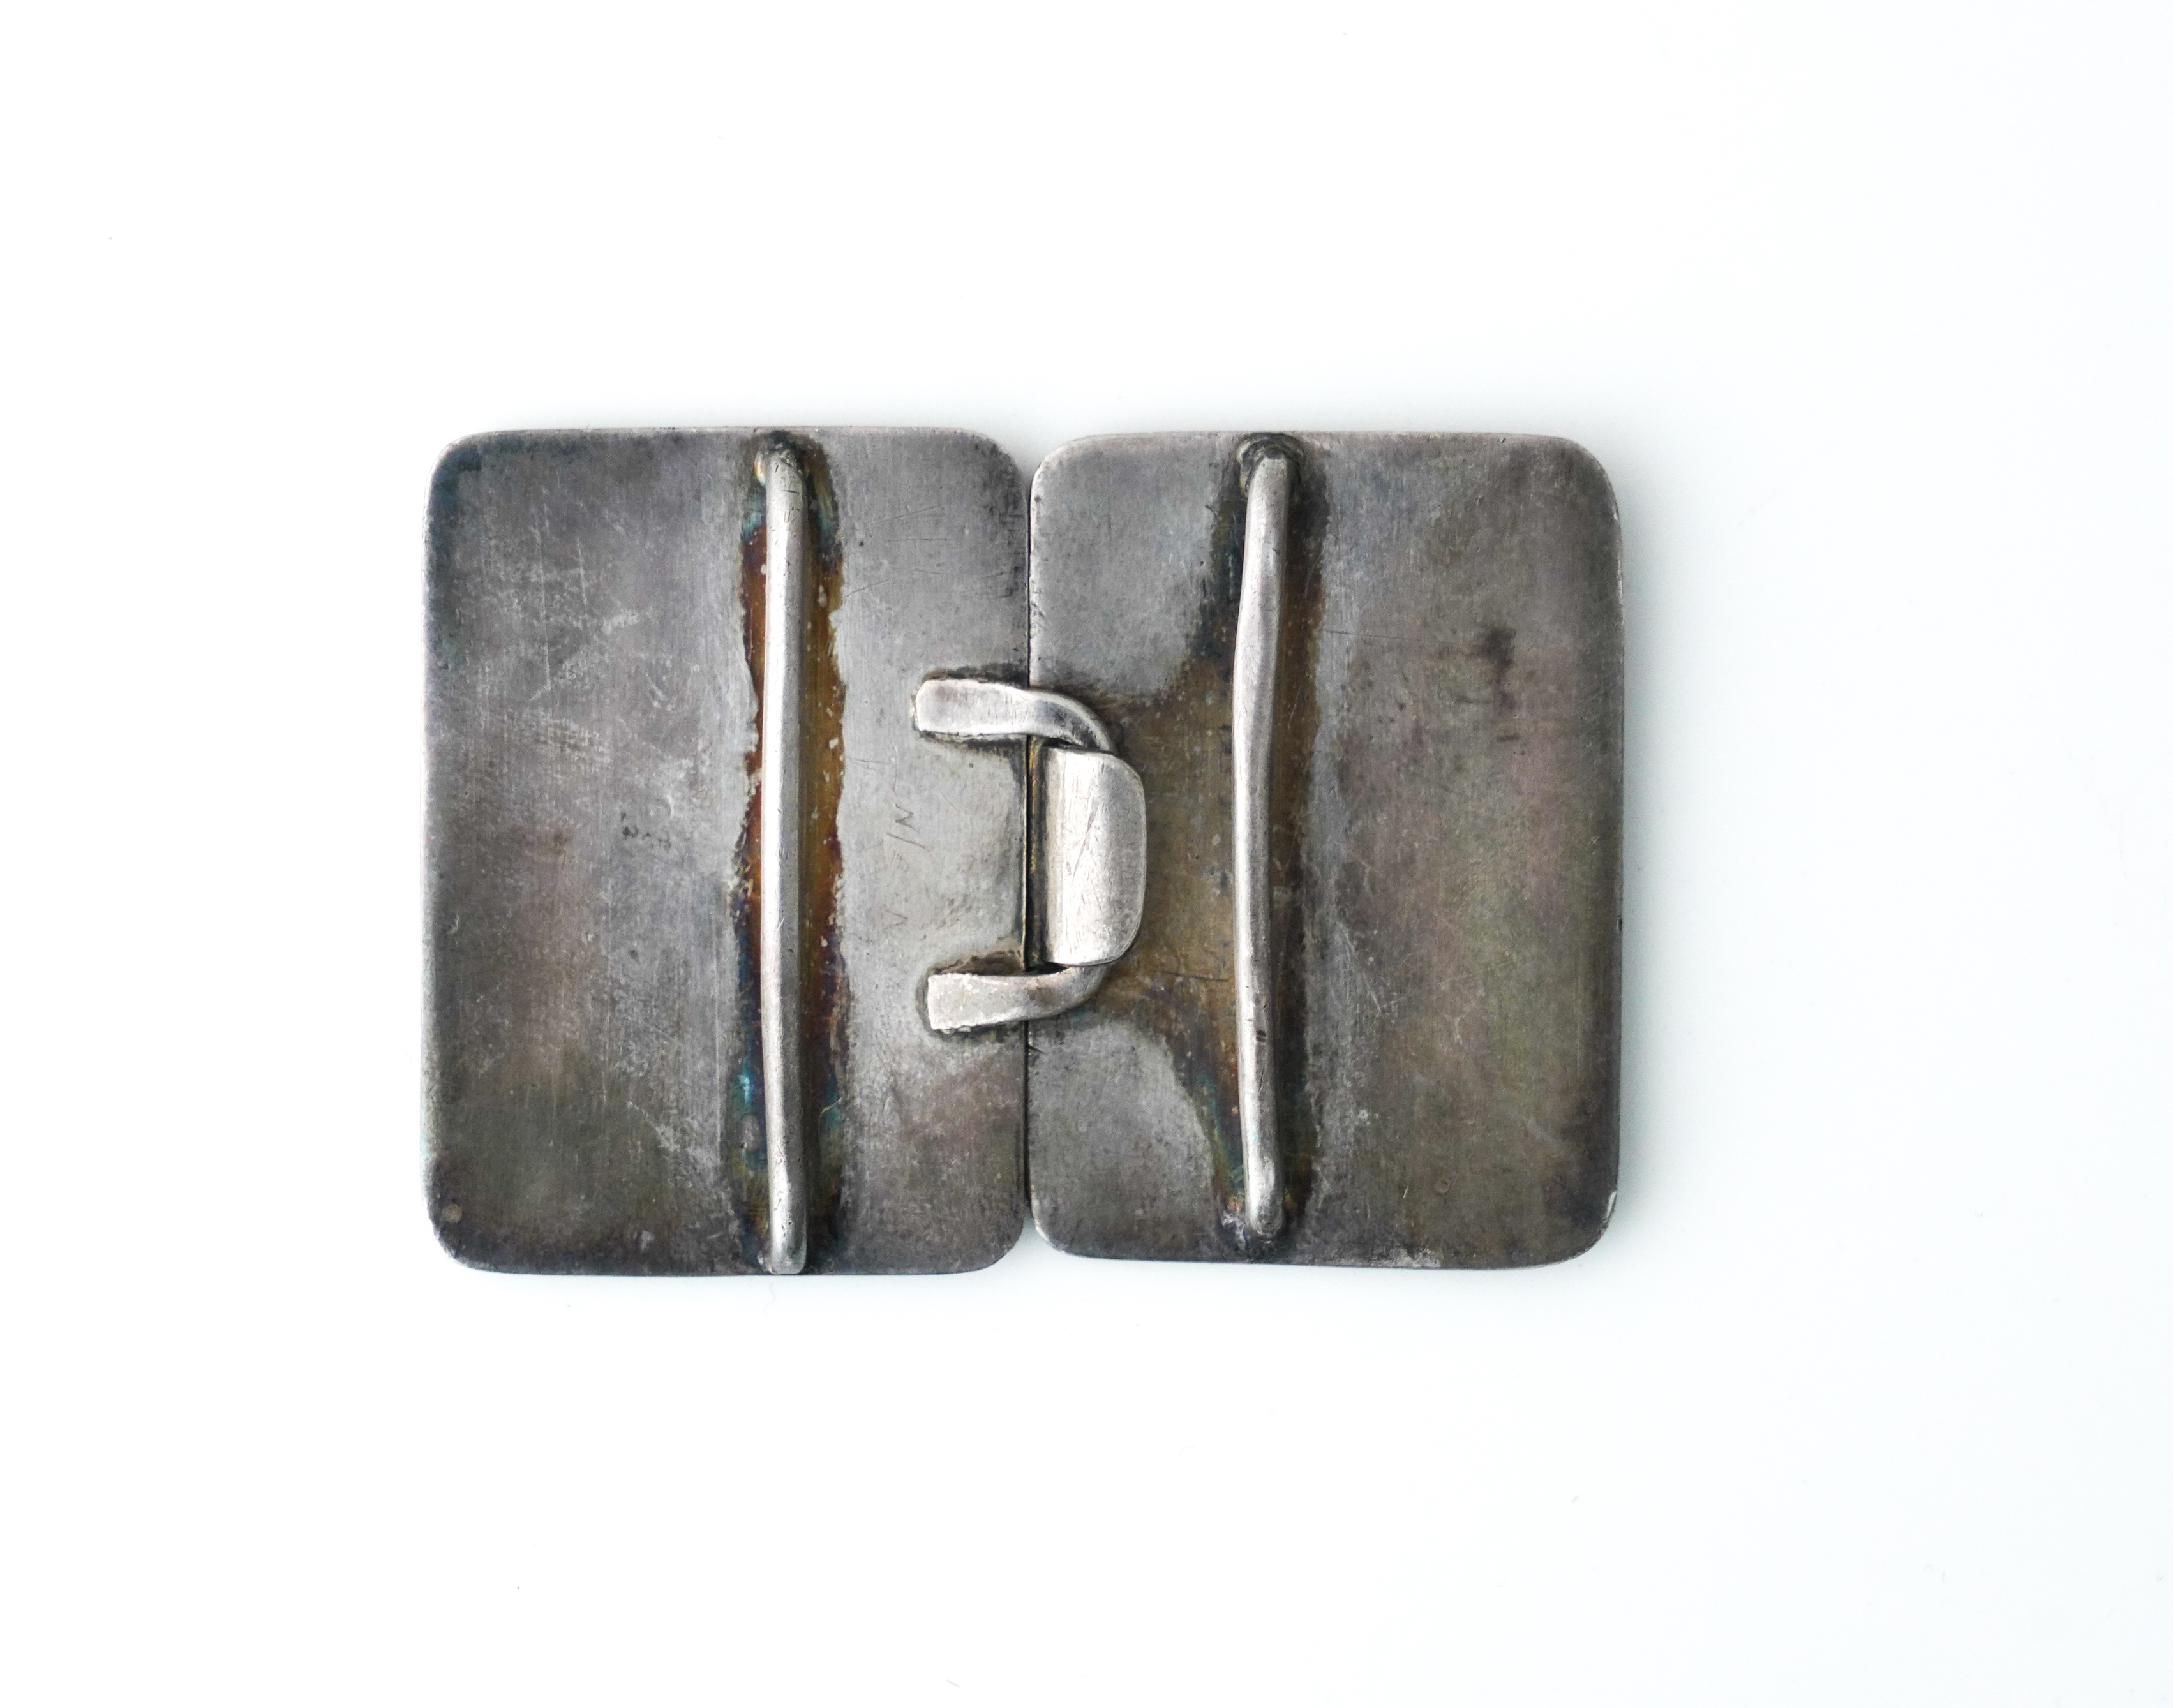 A SILVER AND ENAMELLED TWO PIECE RECTANGULAR WAISTBELT BUCKLE - Image 3 of 3